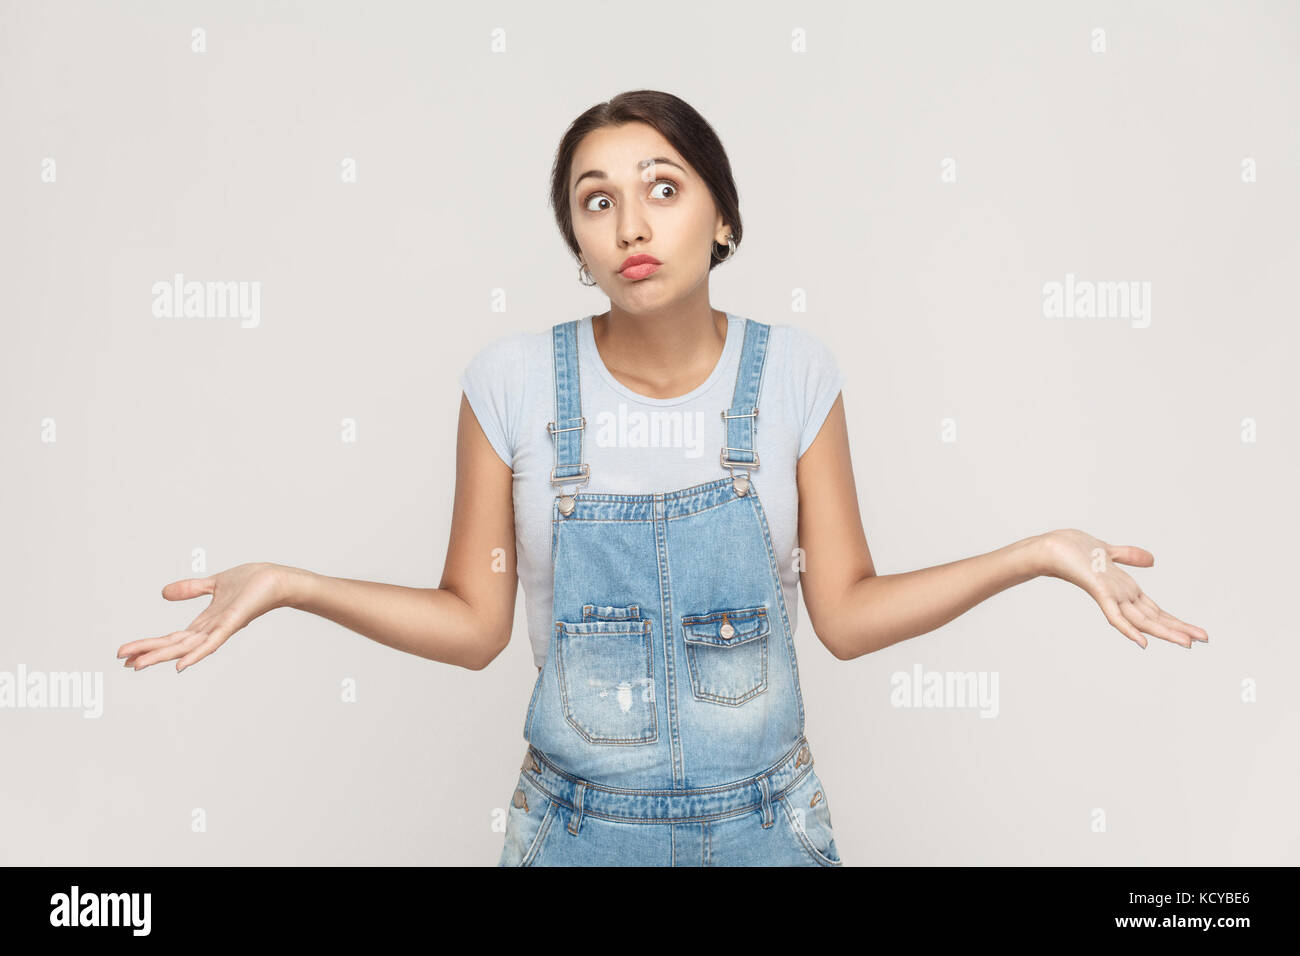 Negative human emotions, facial expressions. Puzzled  young adult woman with arms out, shrugging her shoulders, saying: who cares, so what, I don't kn Stock Photo